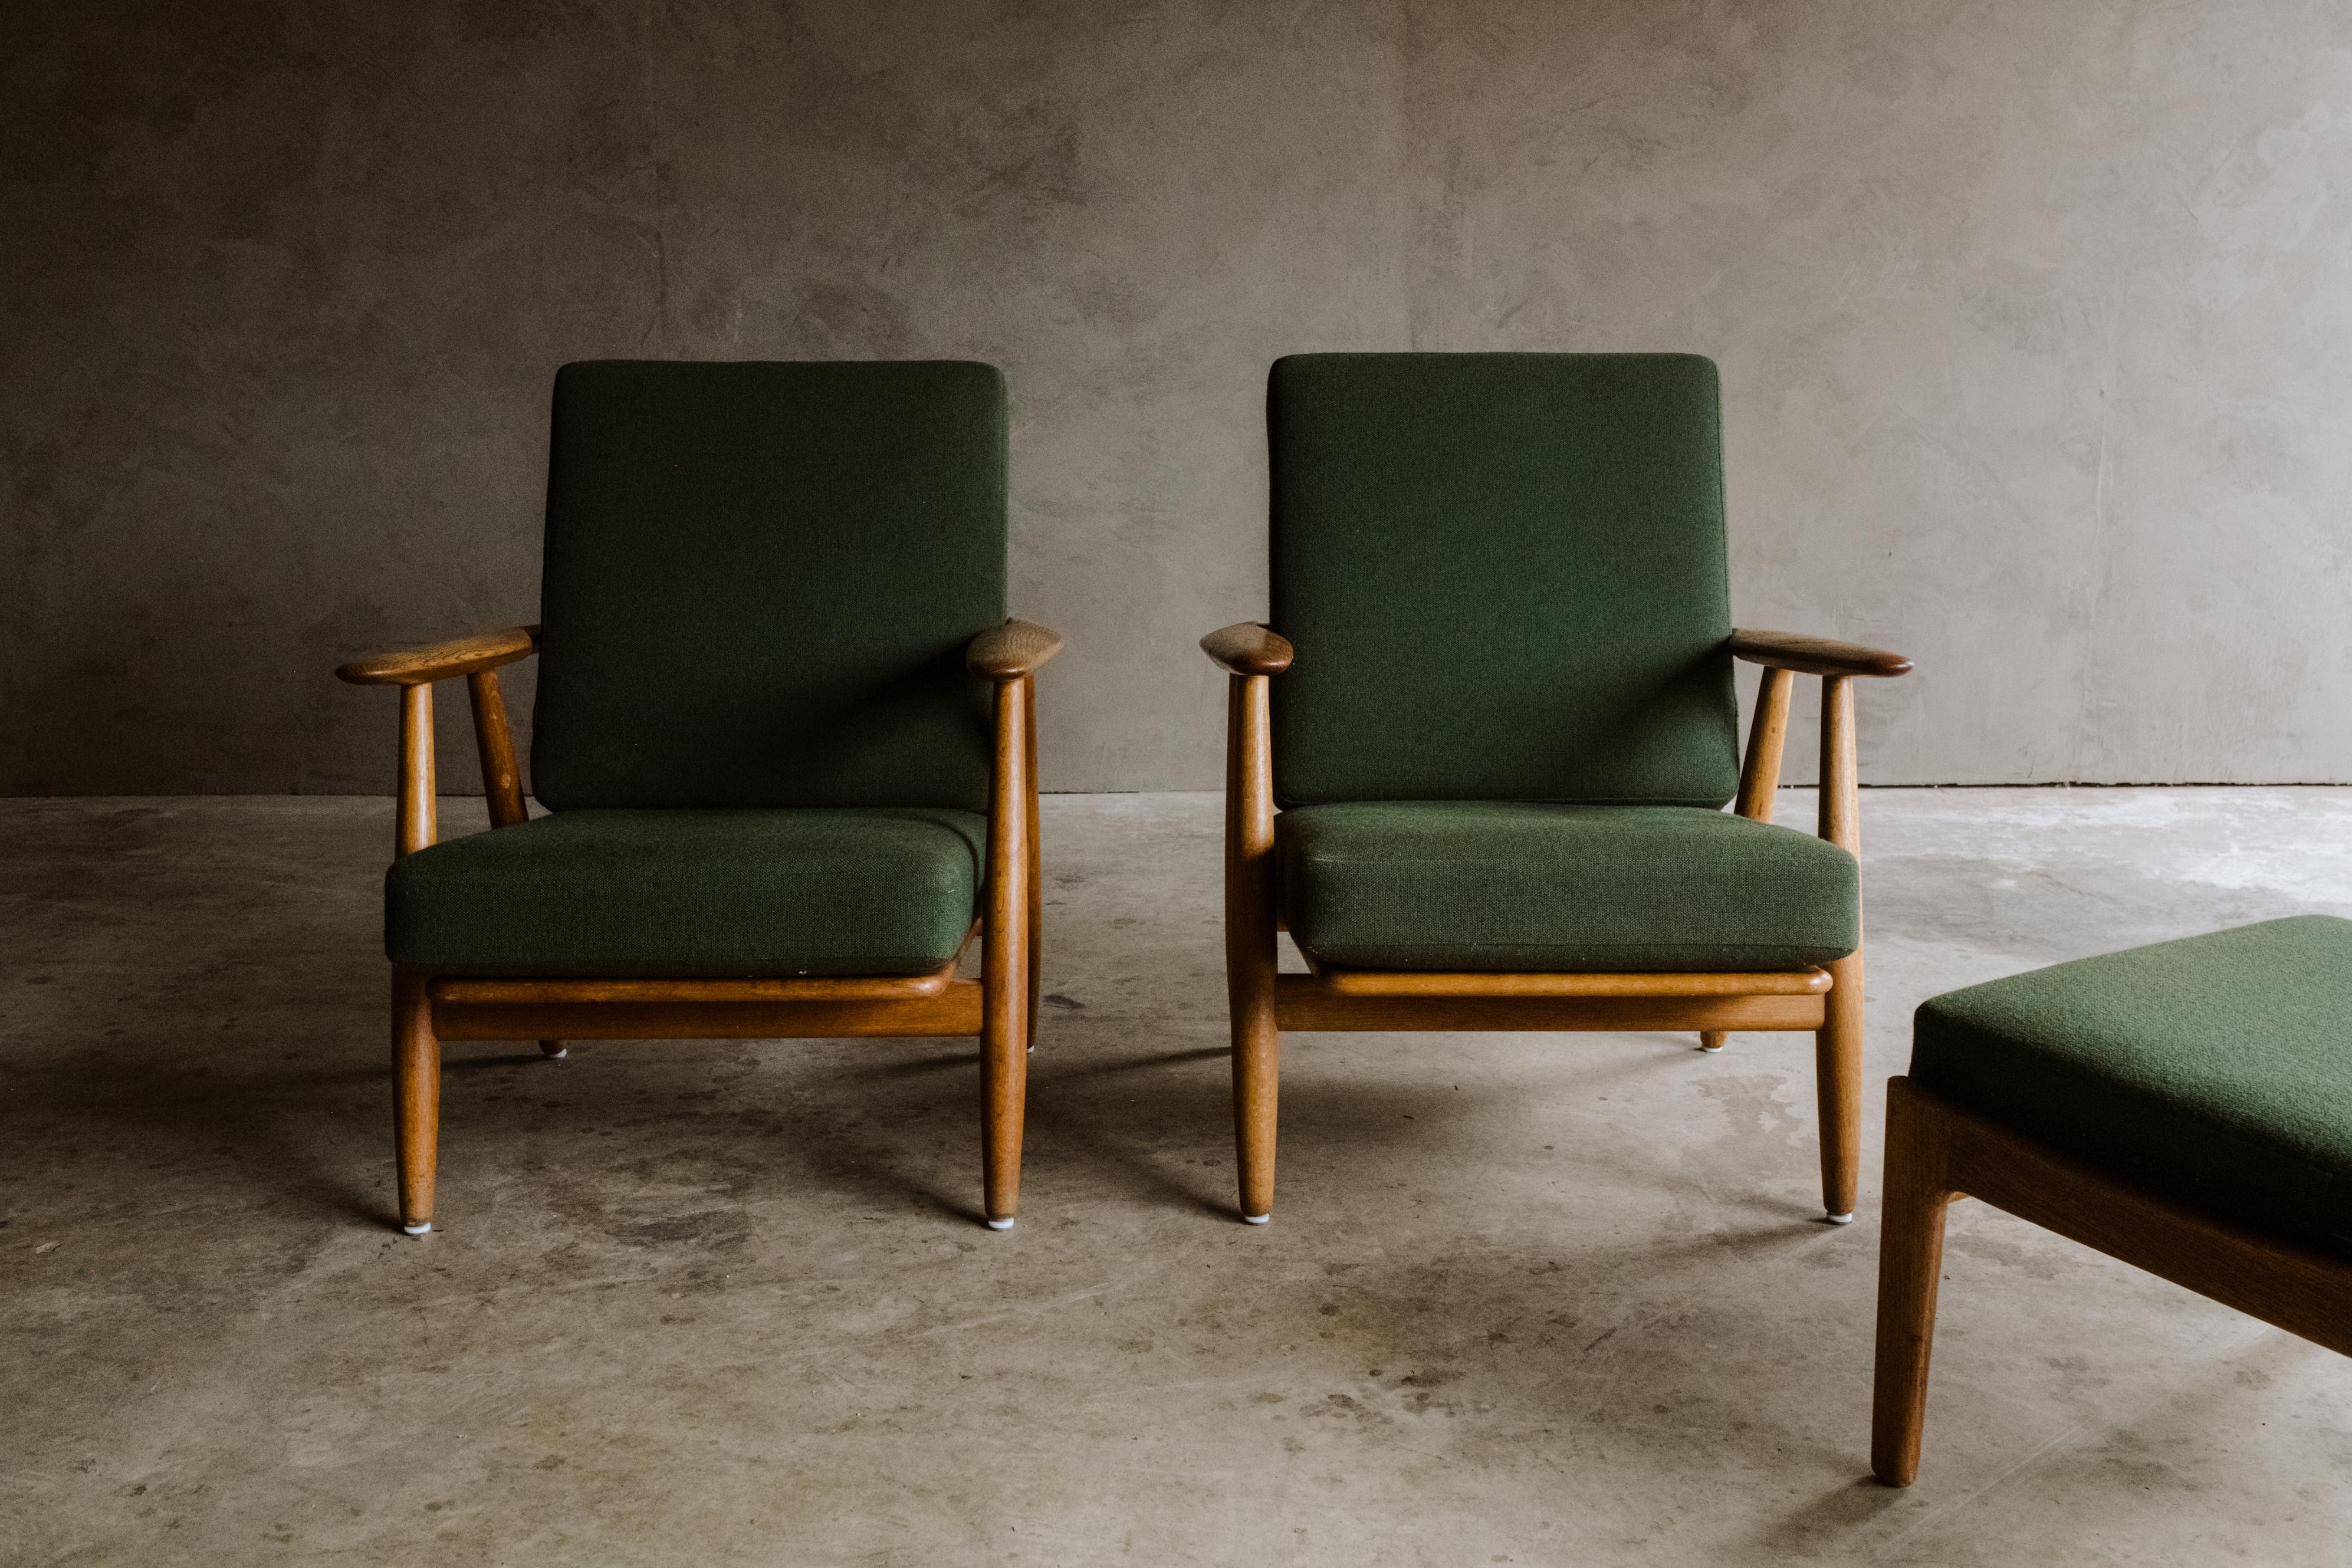 Vintage pair of Hans Wegner Cigar chairs with ottoman, Denmark 1960s. Solid oak frame with original green upholstered cushions. Light wear and patina.

We don't have the time to write an exhausting description on each of our pieces. We find it